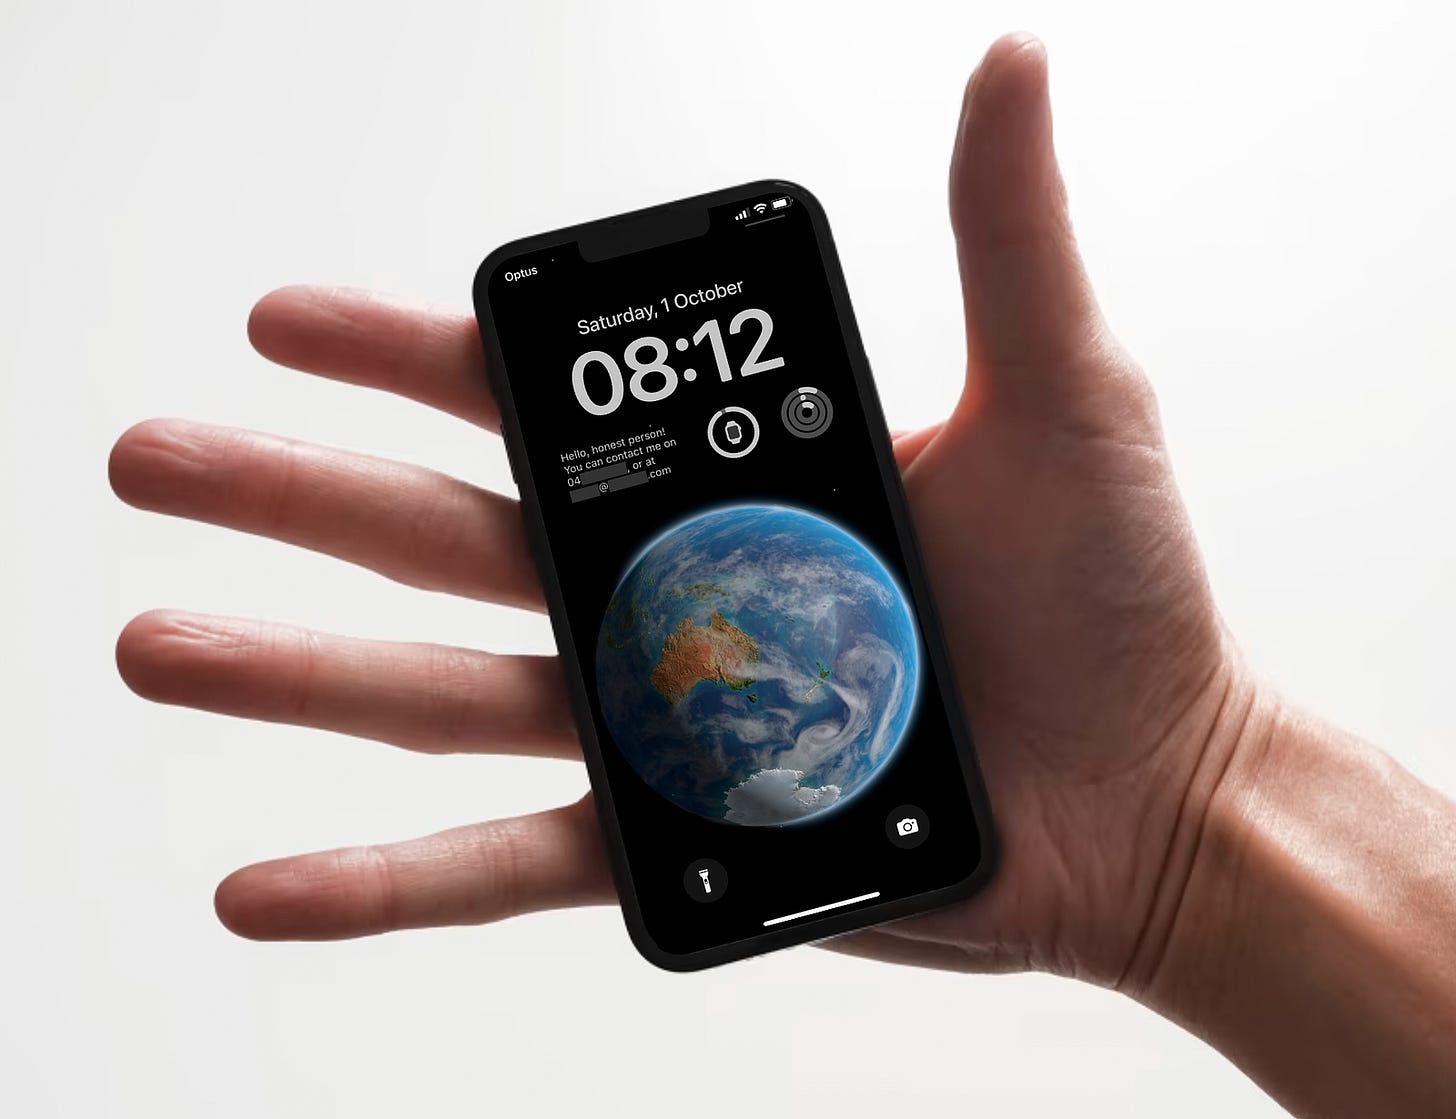 Open hand with black iPhone, showing the lock screen